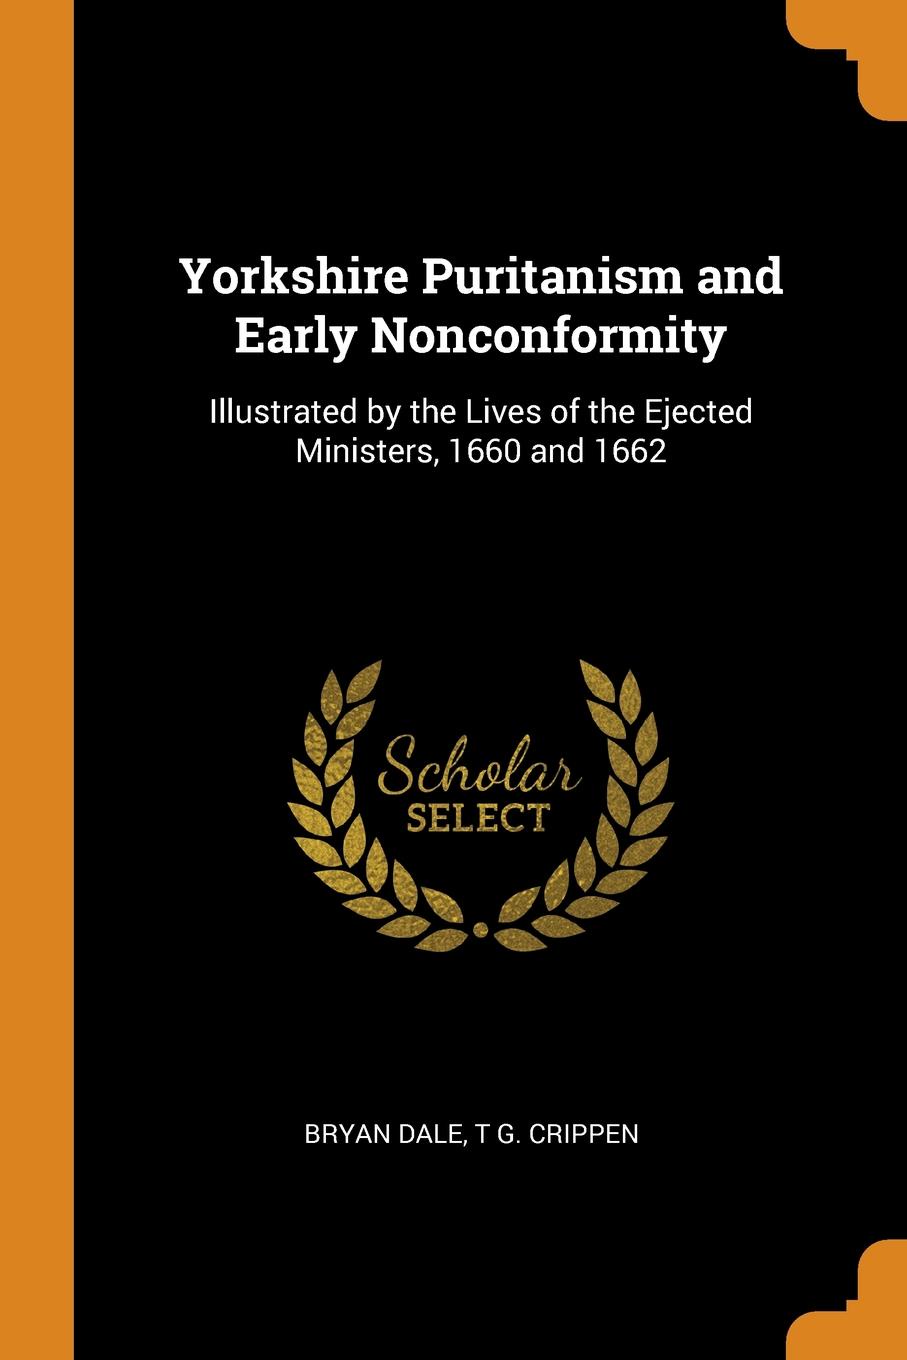 Yorkshire Puritanism and Early Nonconformity. Illustrated by the Lives of the Ejected Ministers, 1660 and 1662